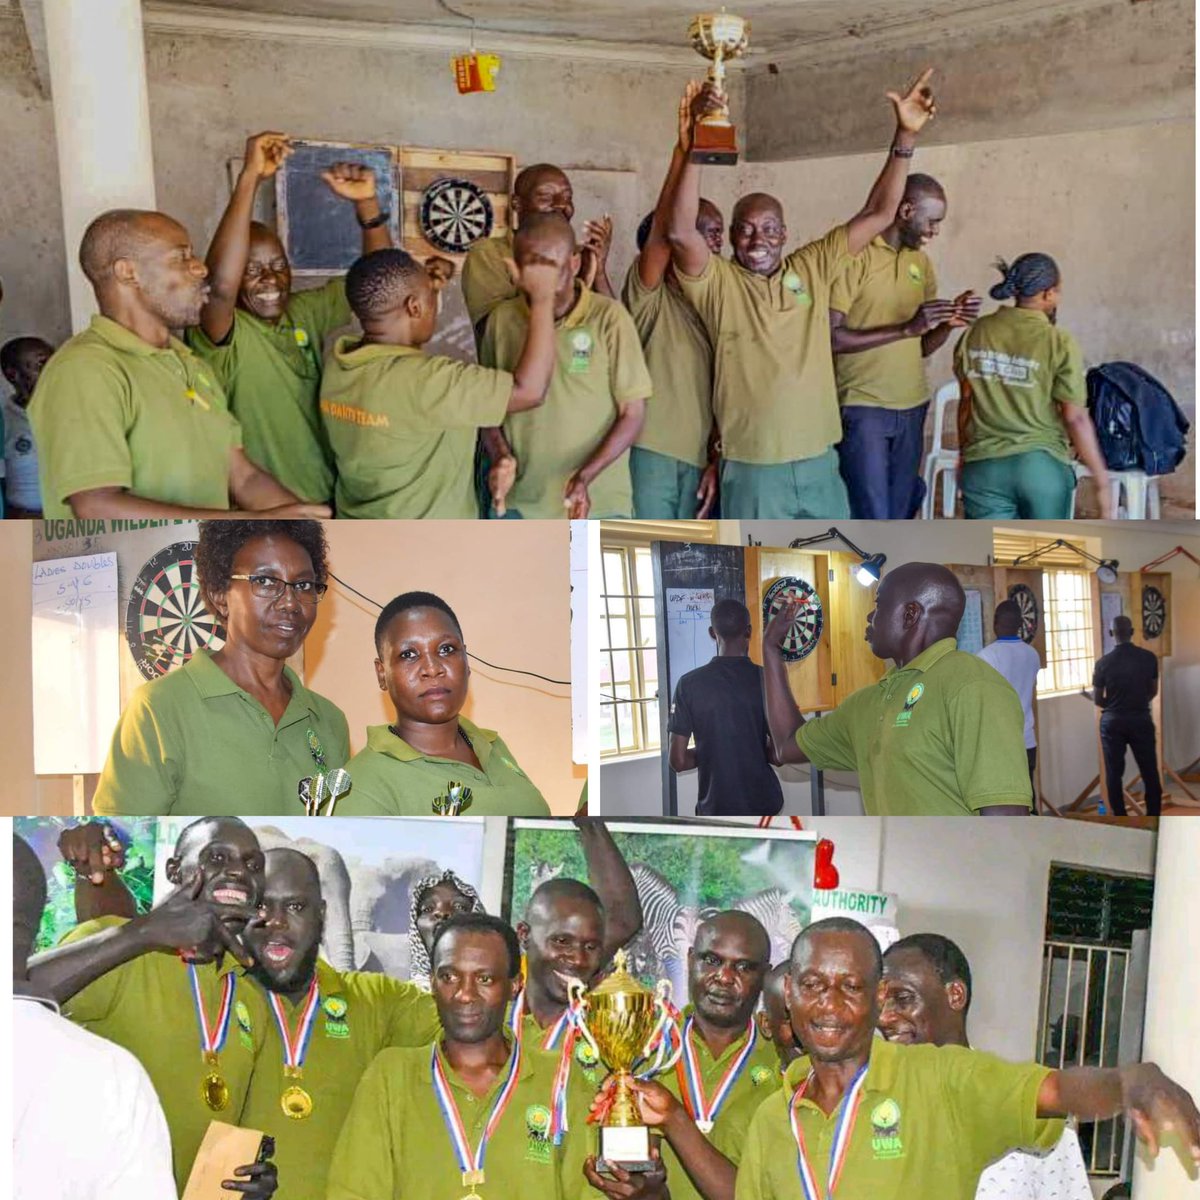 UWA Darts Club Defends Super Cup 2024 The 'Baboons' emerged victorious, defending their title in a round-robin tournament at Town View Hotel, Lira city. They defeated all three opposing teams - UCI, BOU, and UPS - with an impressive 19-10 win against UCI in the final game.